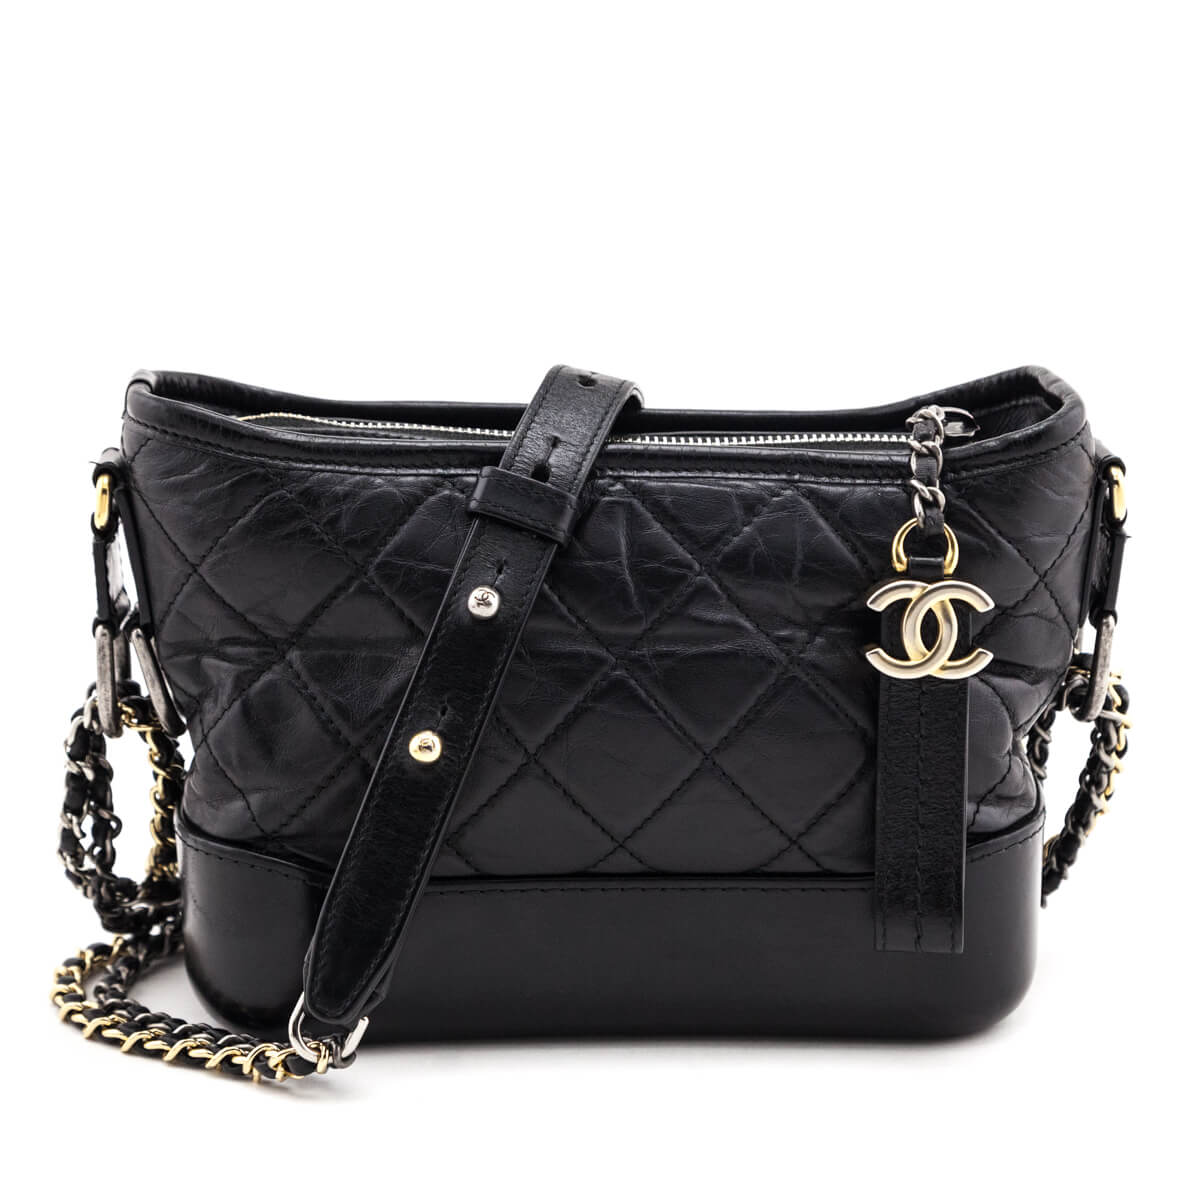 Chanel Black Quilted Aged Calfskin Small Gabrielle Hobo - Love that Bag etc - Preowned Authentic Designer Handbags & Preloved Fashions